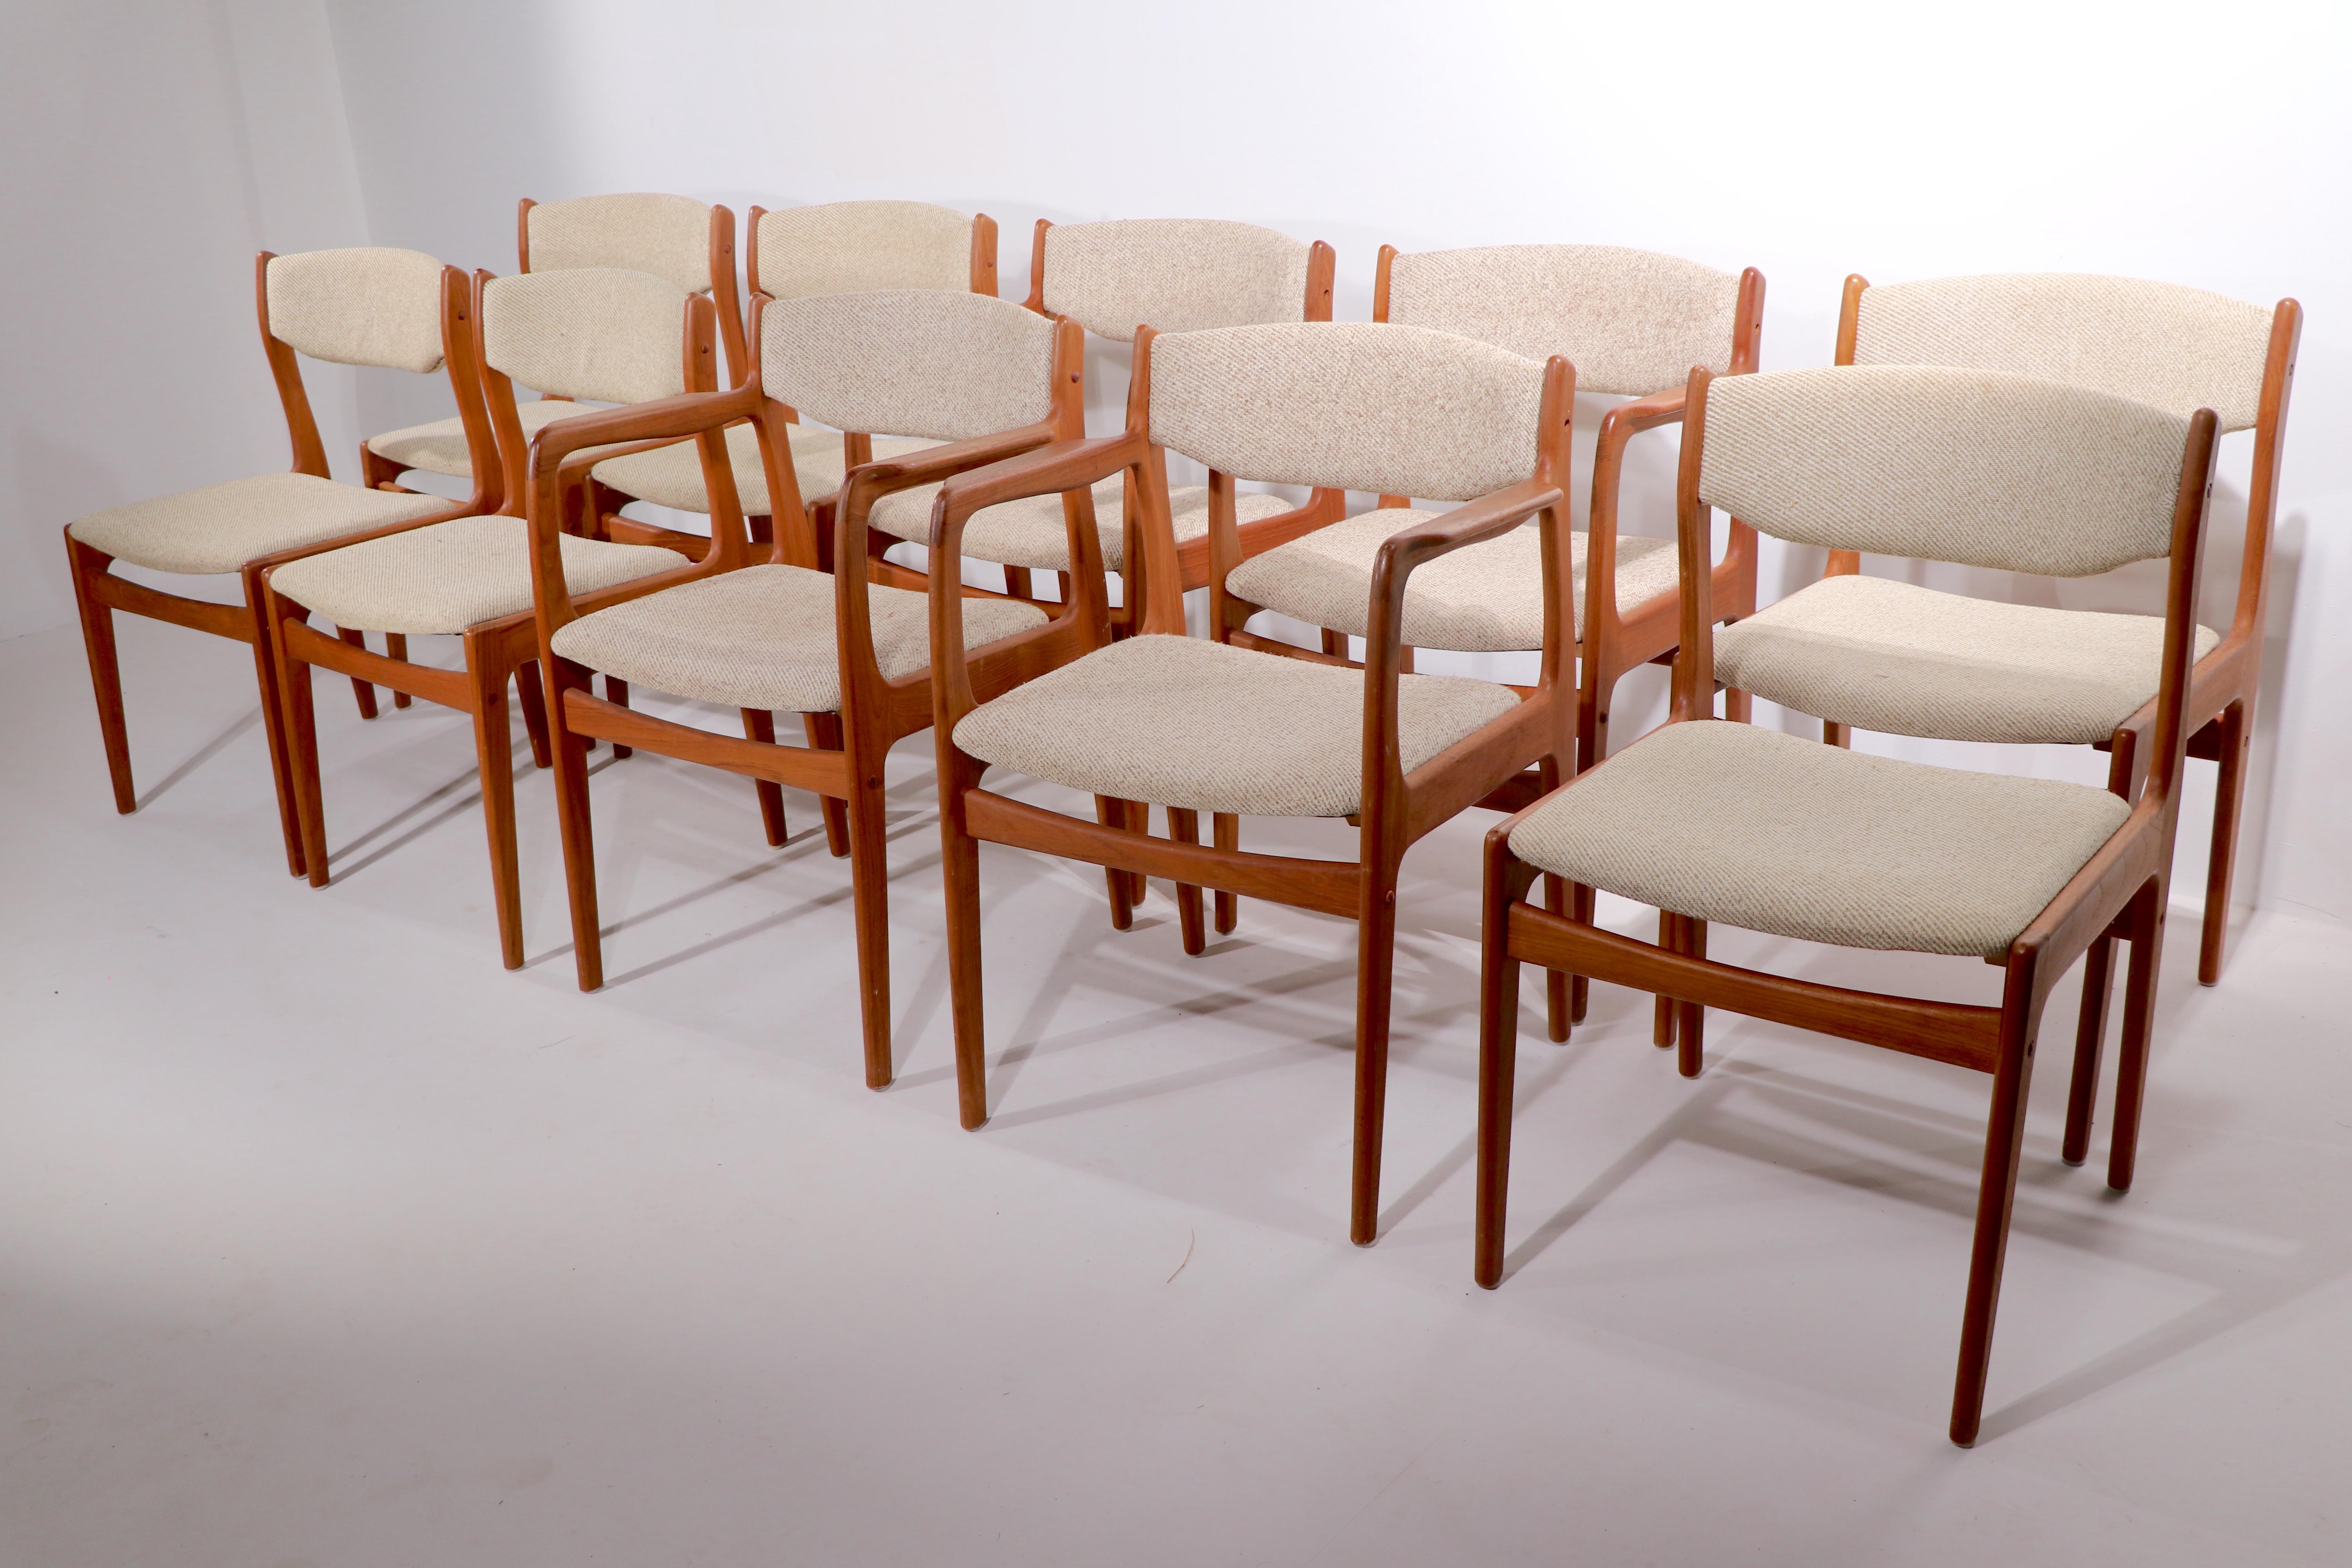 Nice large set of ten Danish Mid-Century Modern dining chairs attributed to Erik Buch for Odense Maskinsnedkeri. Unusual to find a set of ten, perfect for a very large dining, or conference table setting. Solid teak frames, upholstered seats and